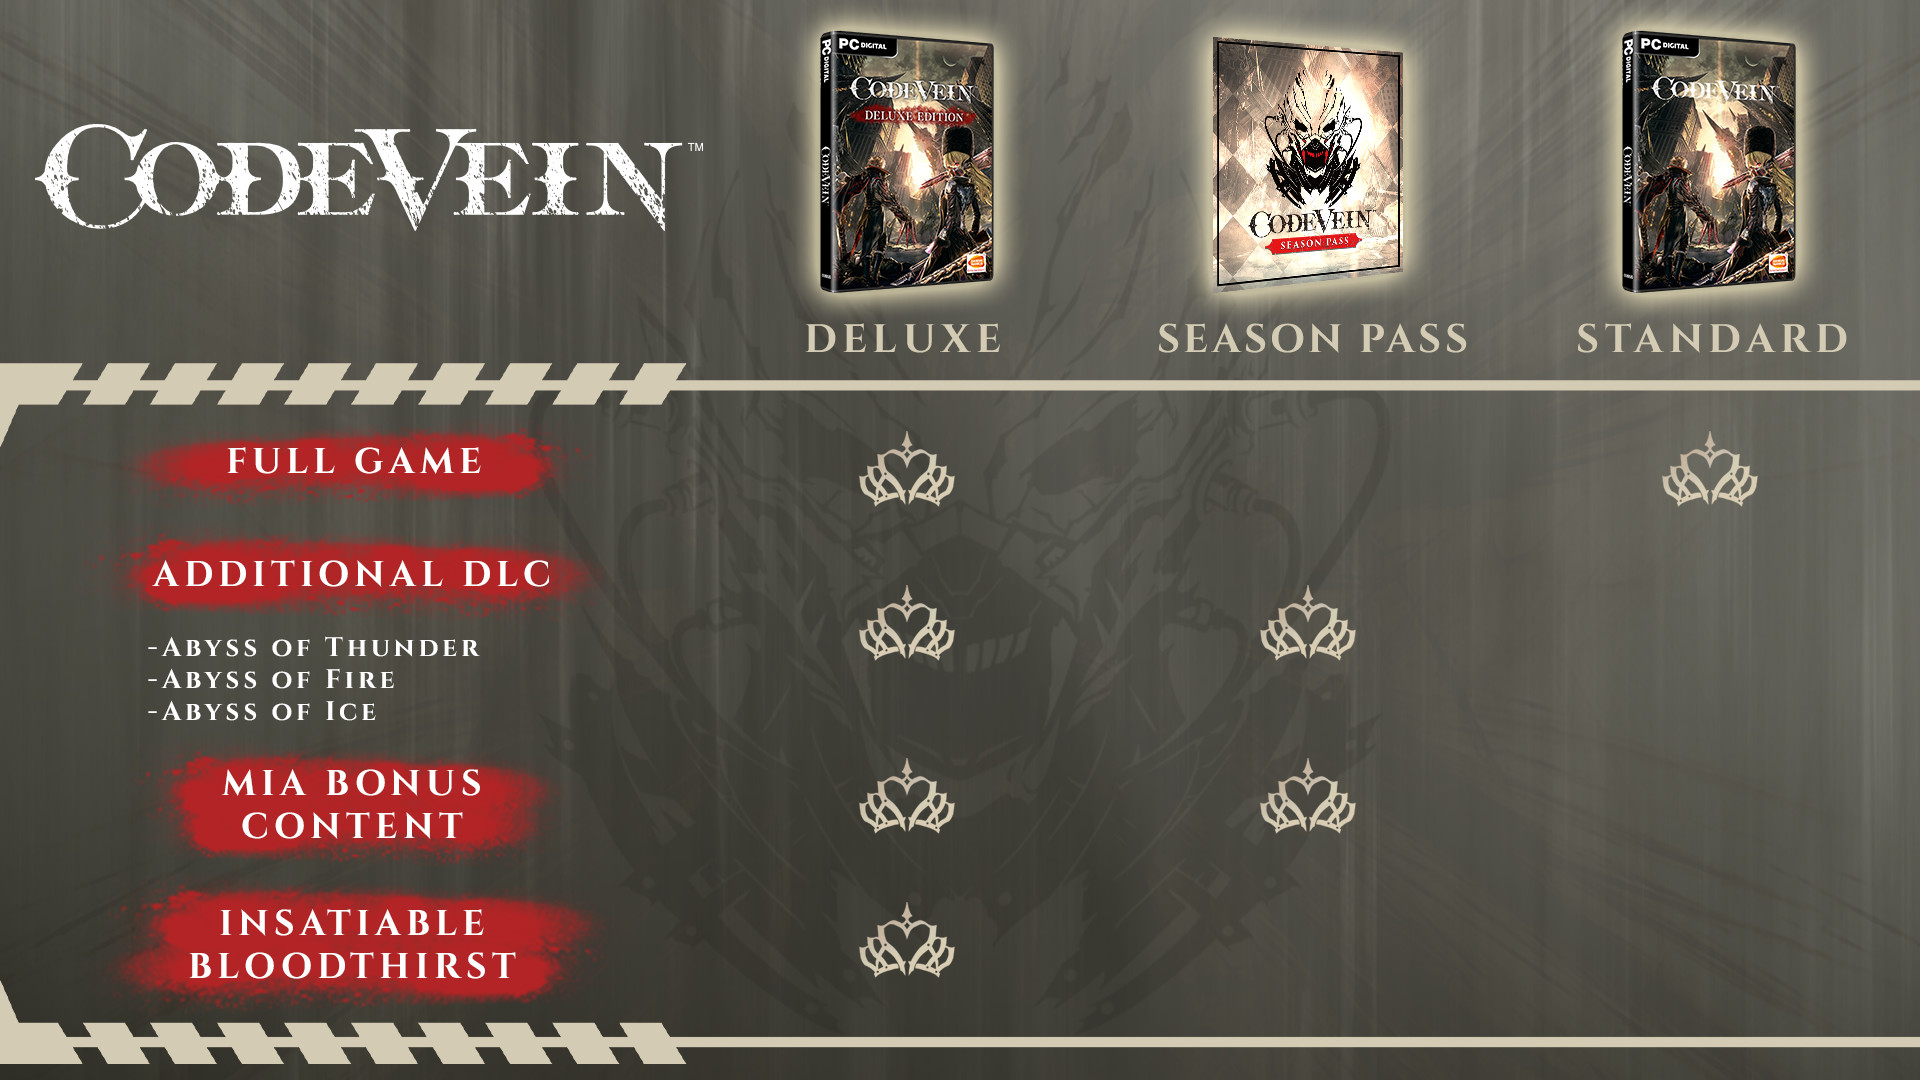 Is CODE VEIN playable on any cloud gaming services?